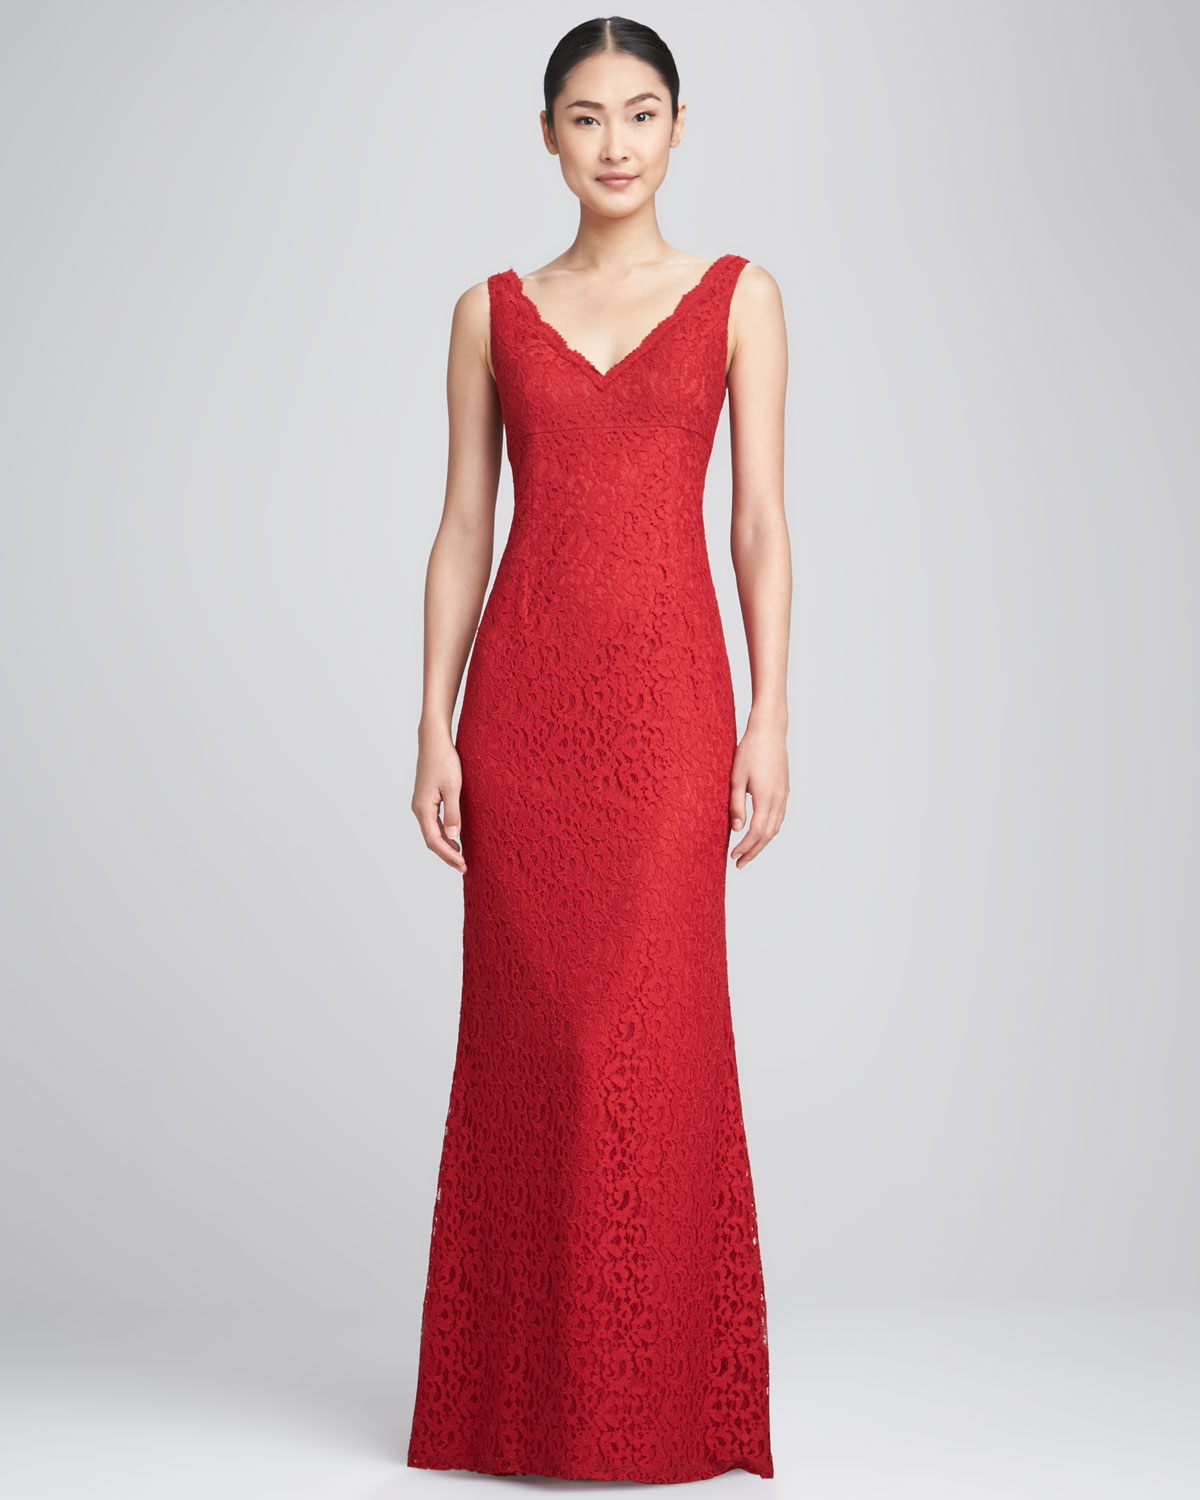 Lyst - Aidan Mattox Sleeveless Lace Overlay Gown in Red